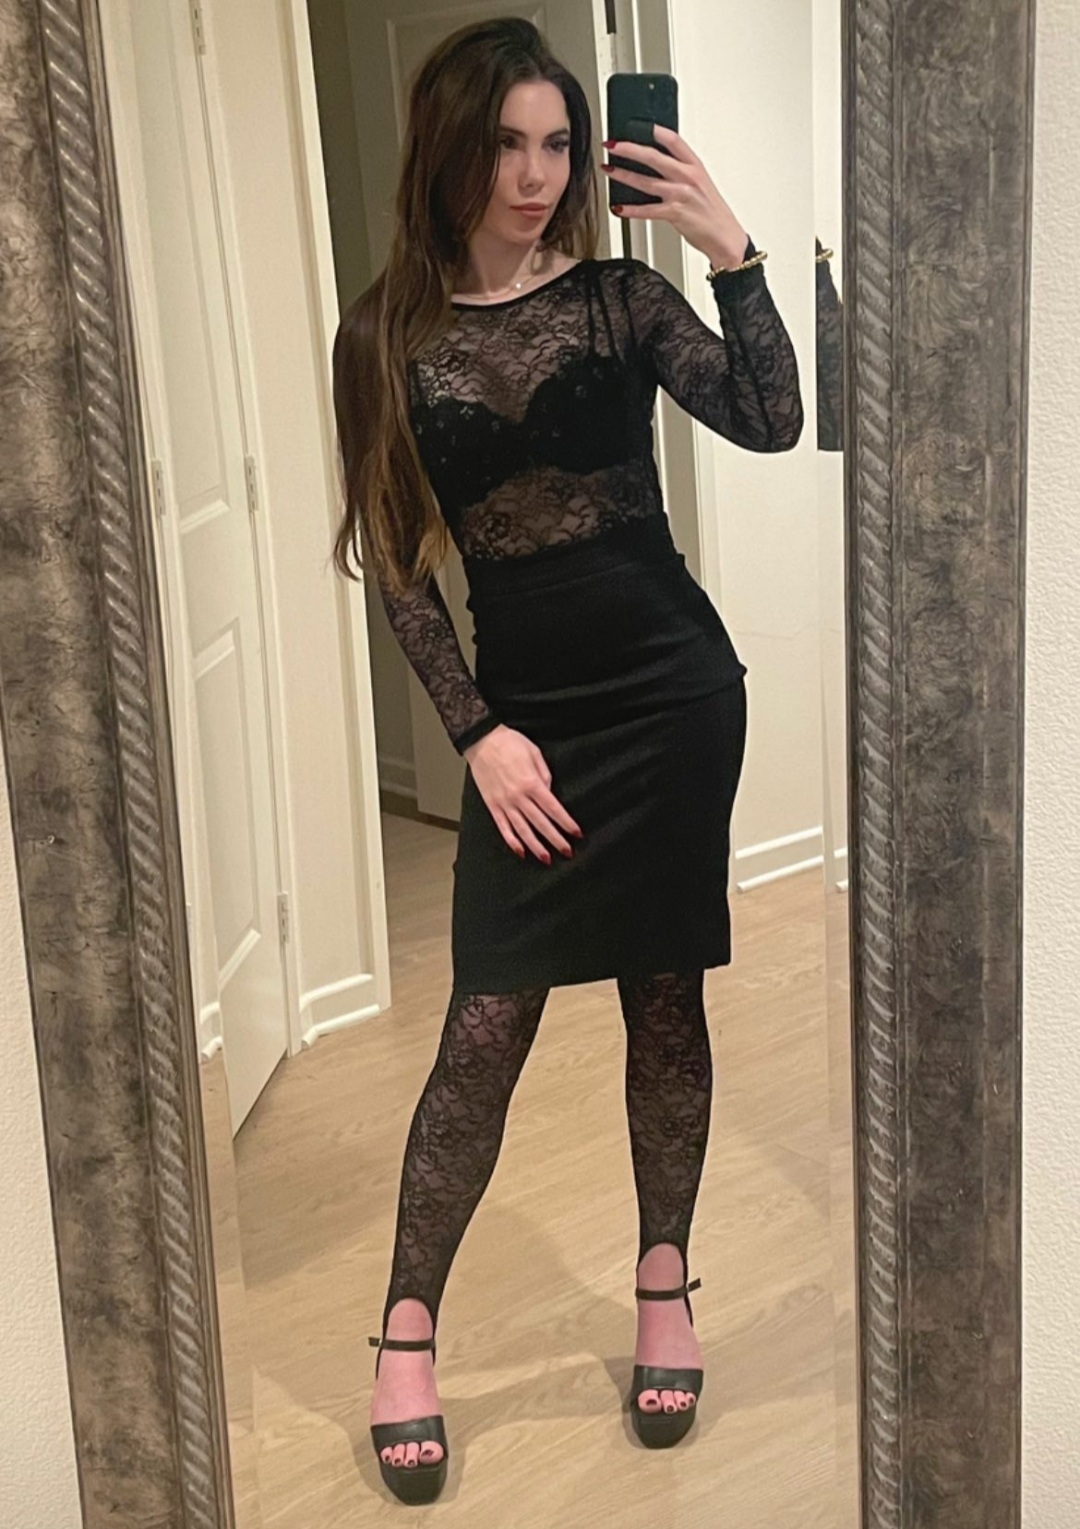 ben durston recommends mckayla maroney pantyhose pic